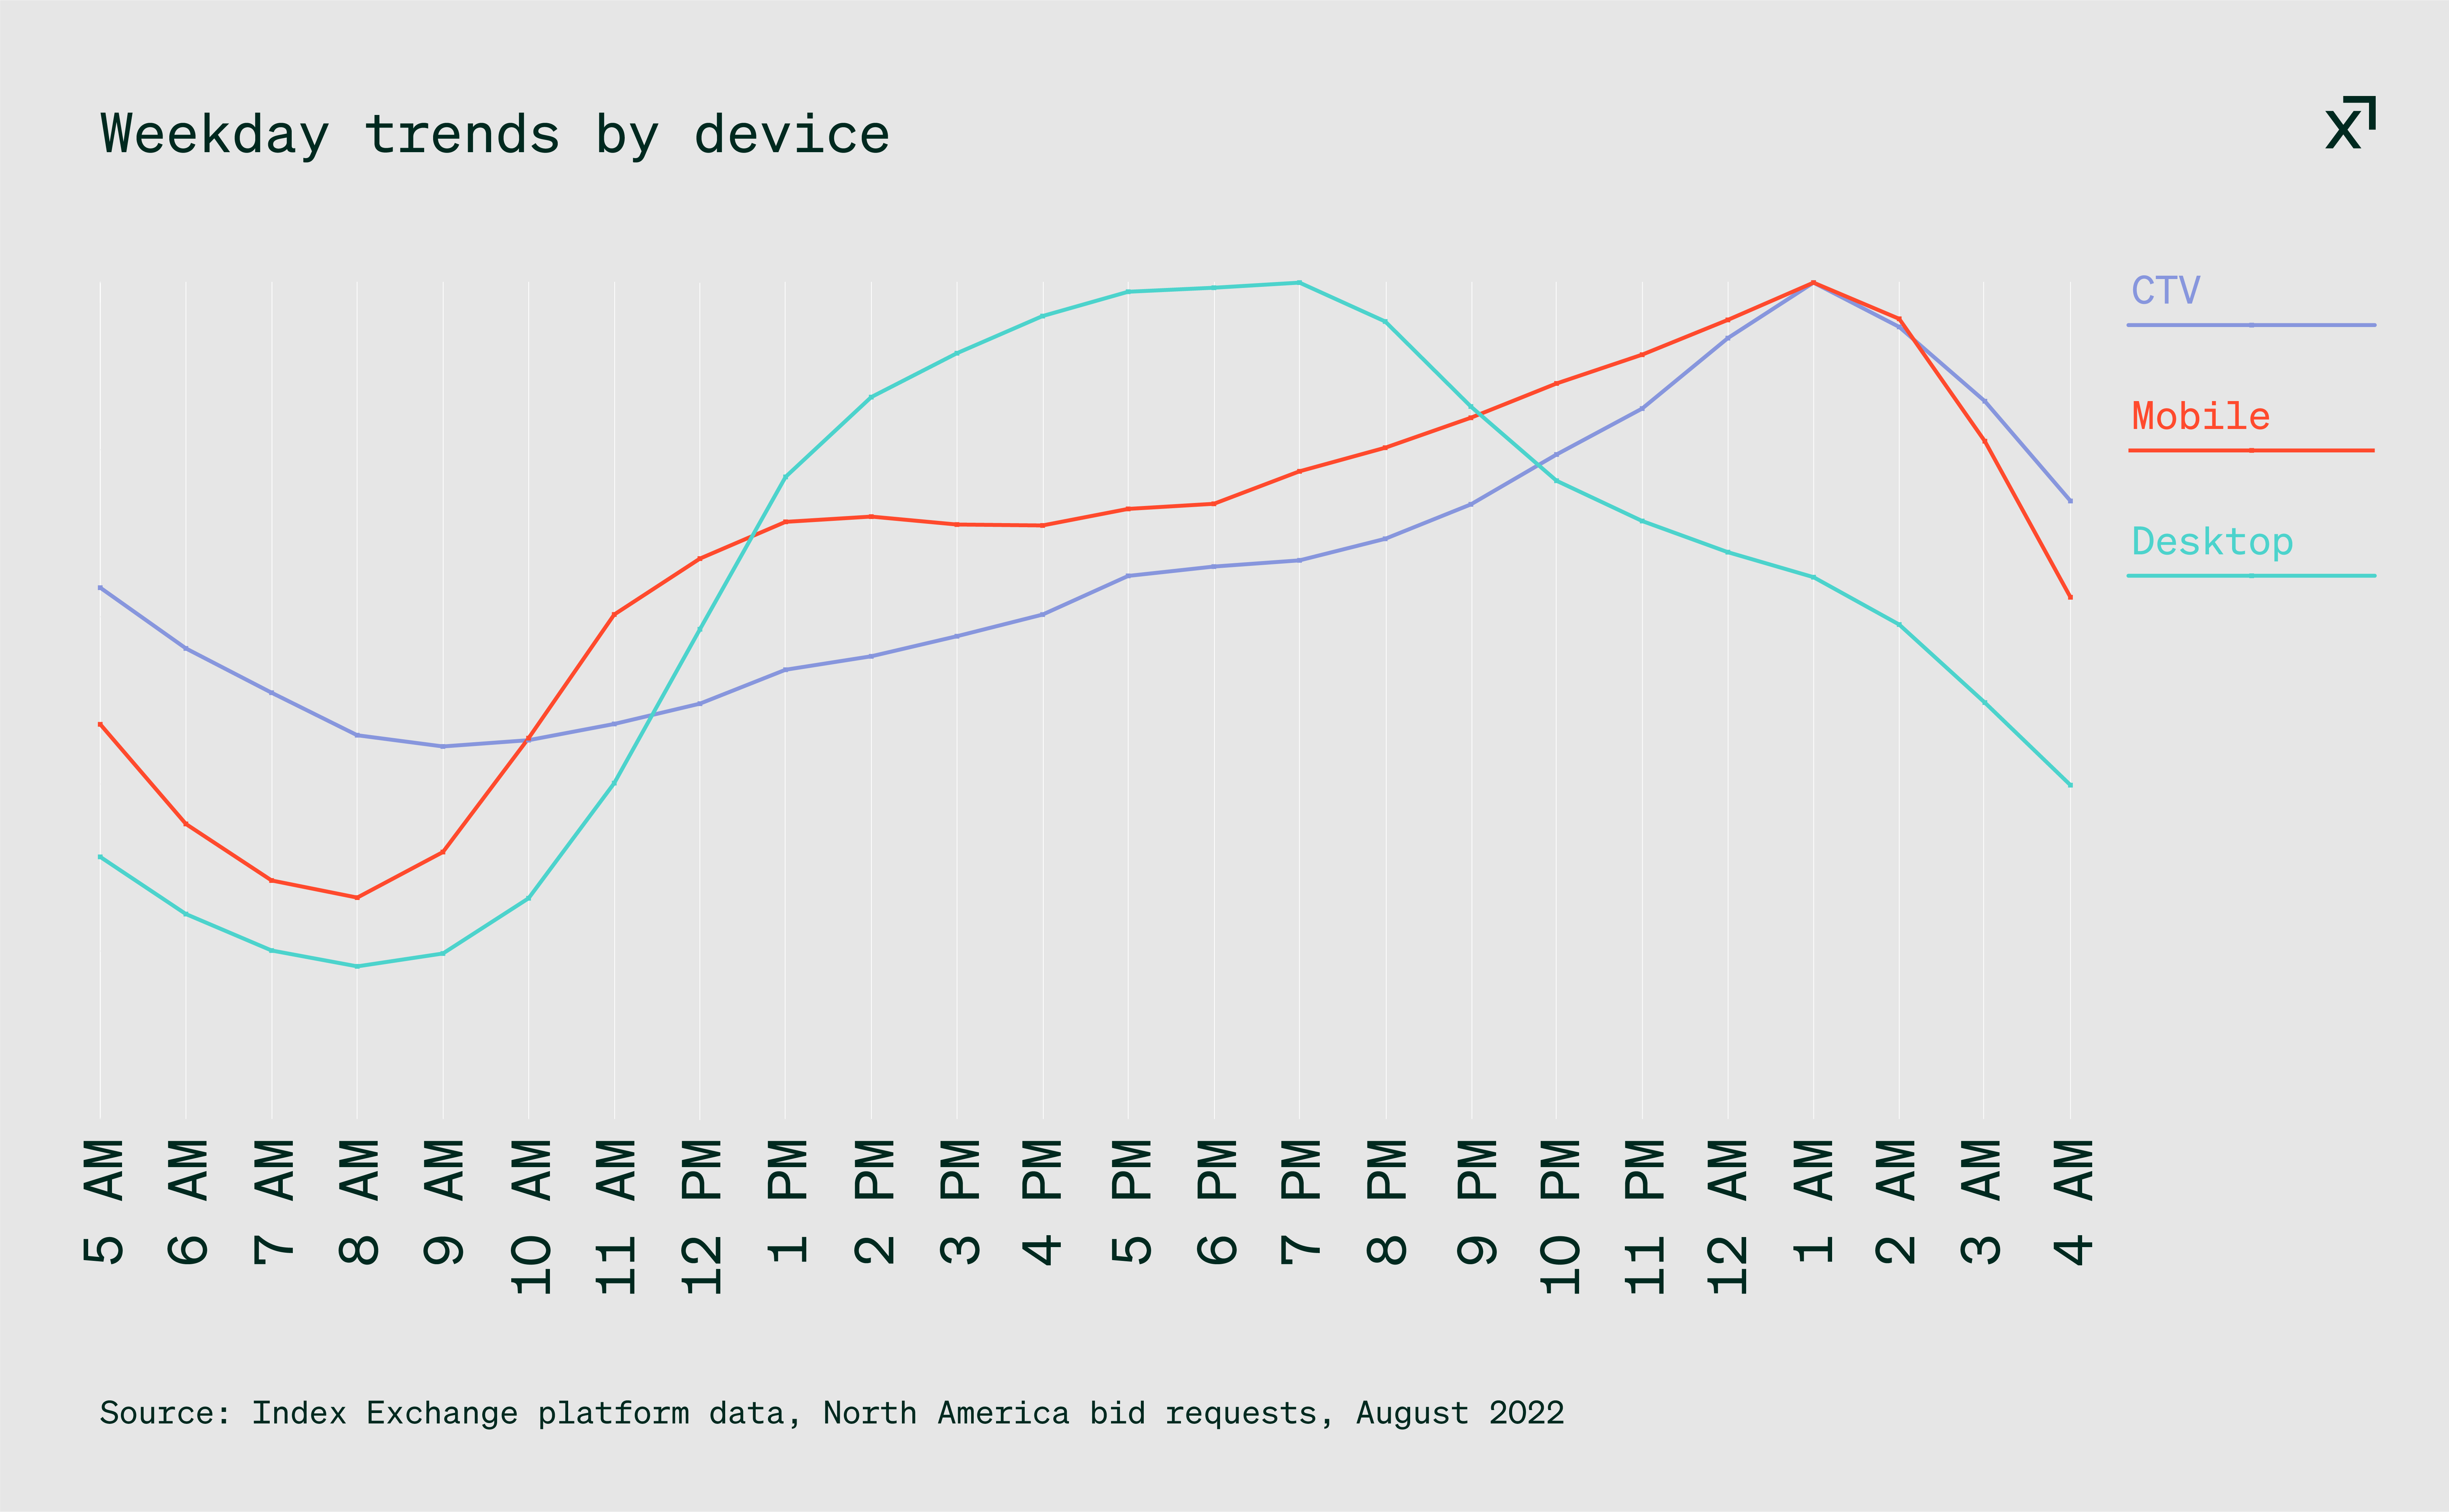 Weekday trends by device chart: CTV, mobile, and desktop usage over 24 hour period